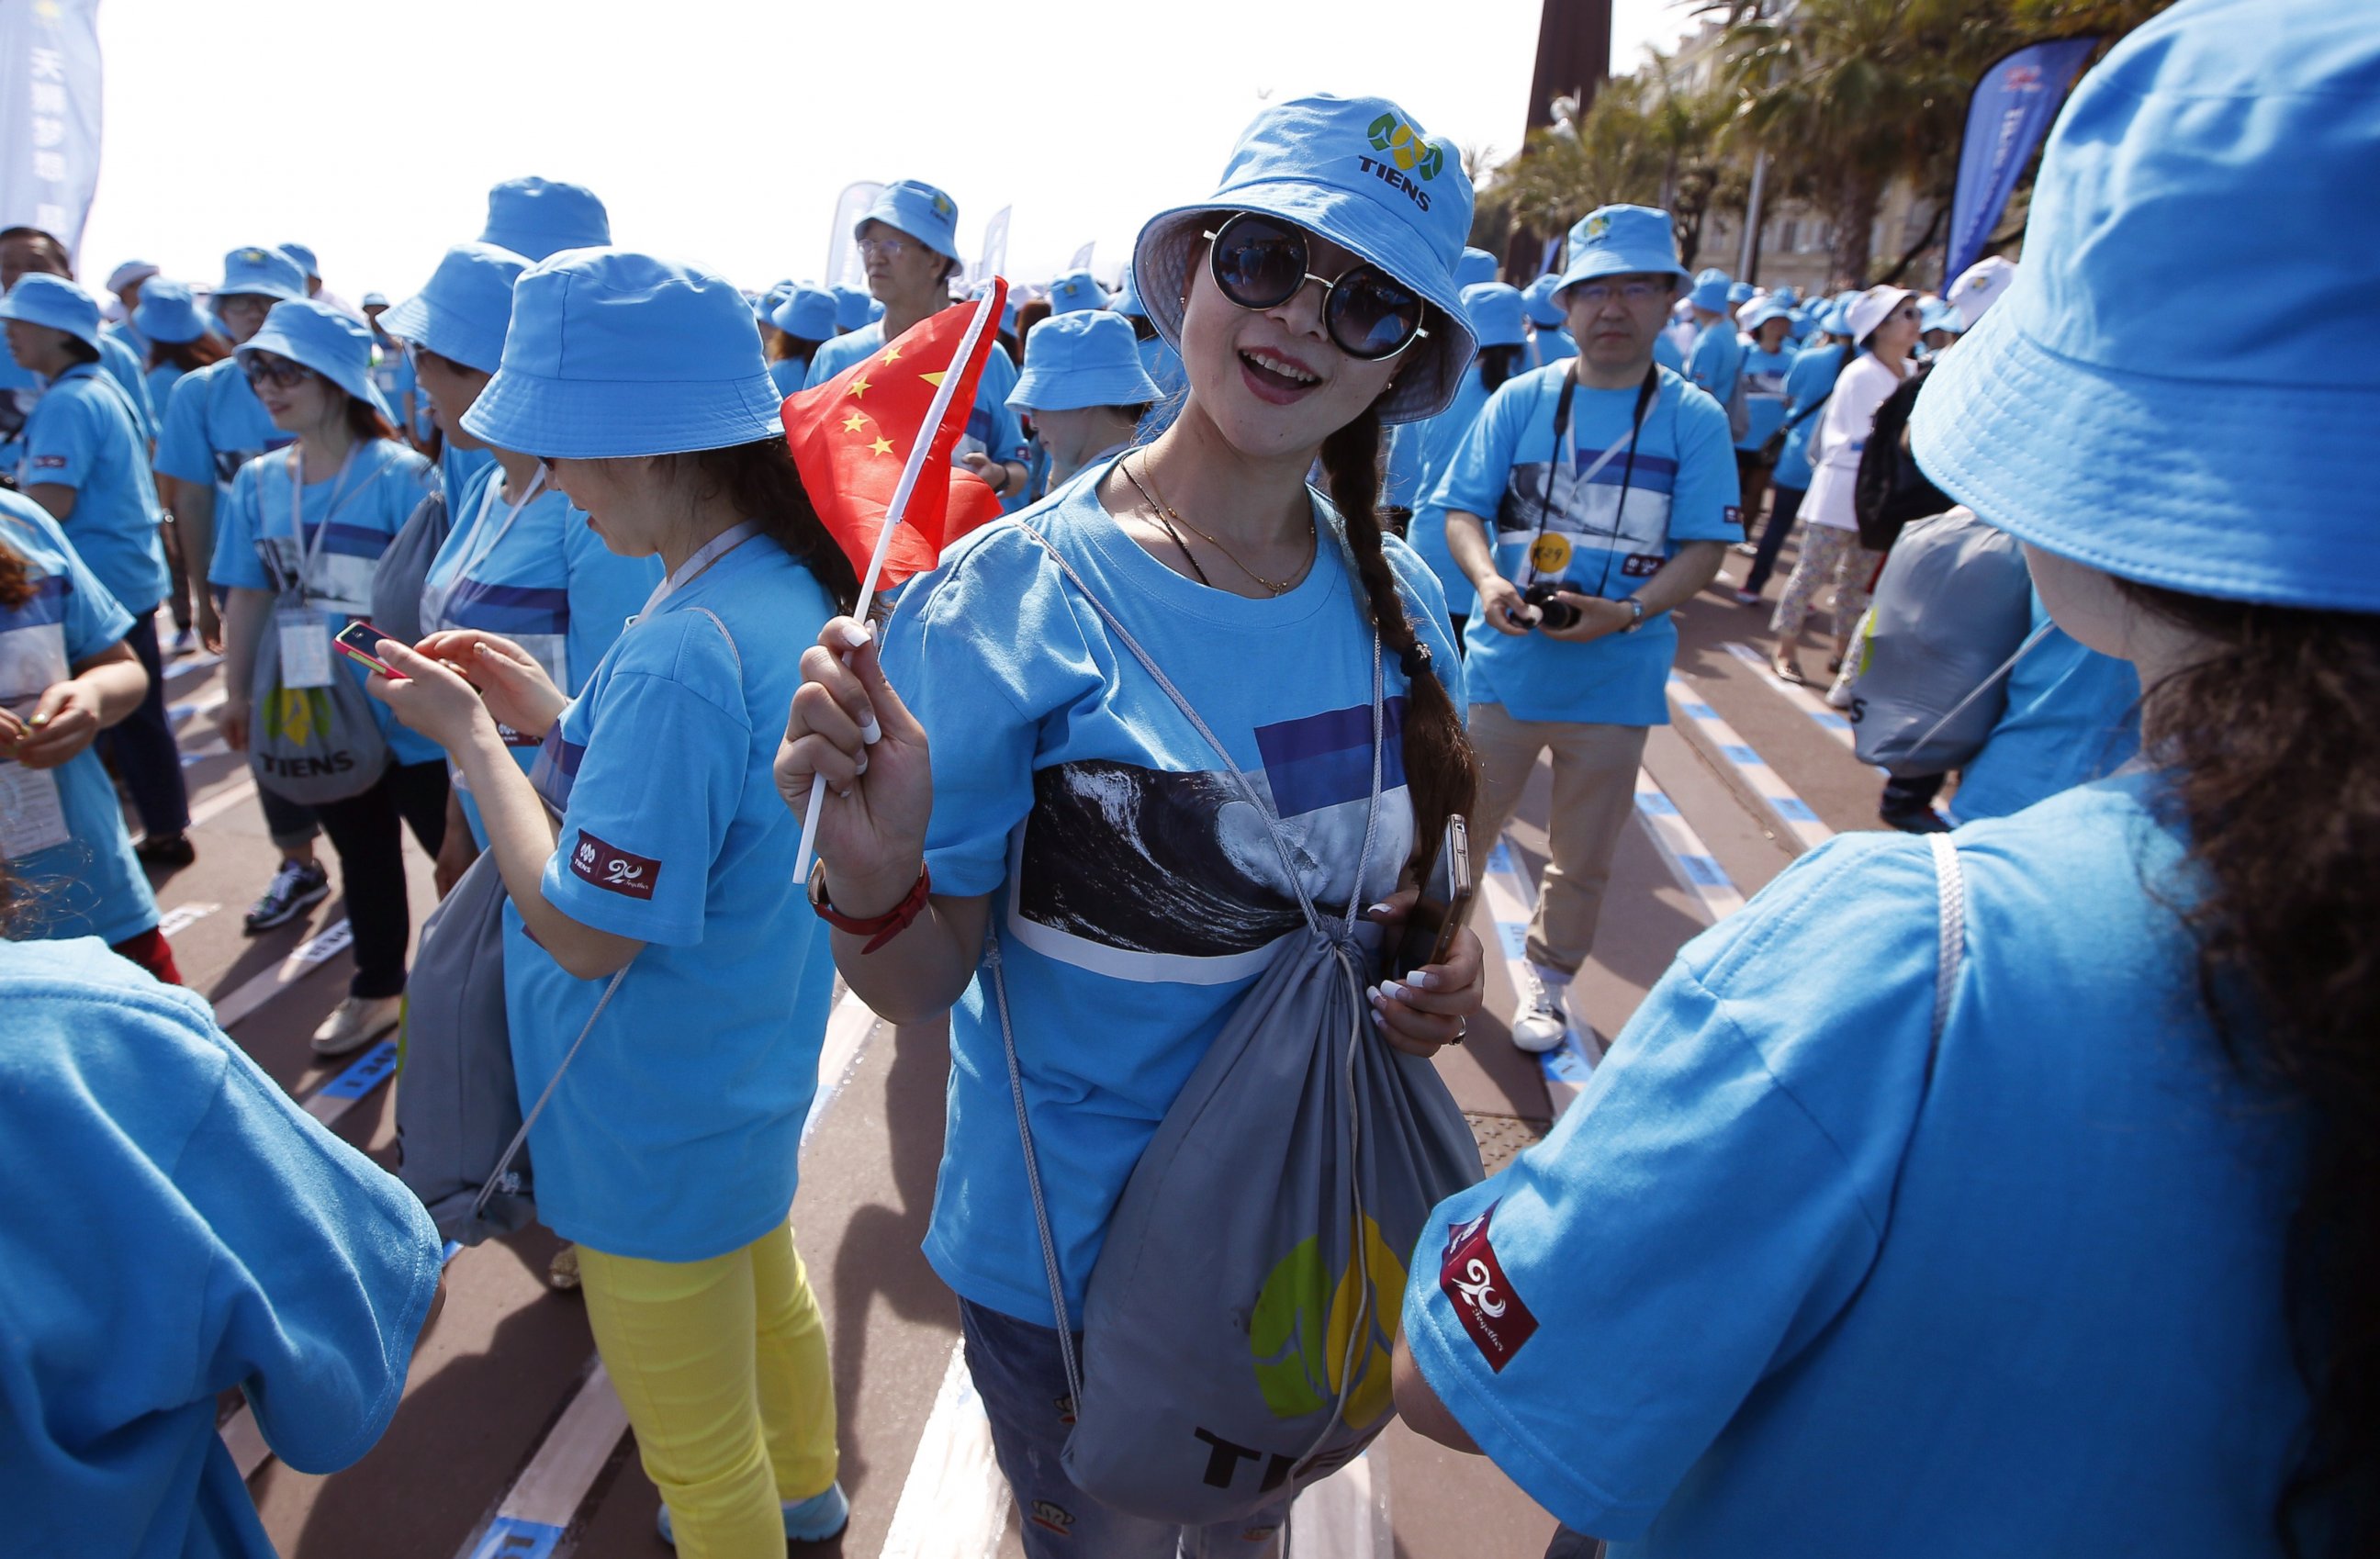 PHOTO: Employees of the Chinese company 'Tiens' attend a parade on May 8, 2015 in Nice, France.